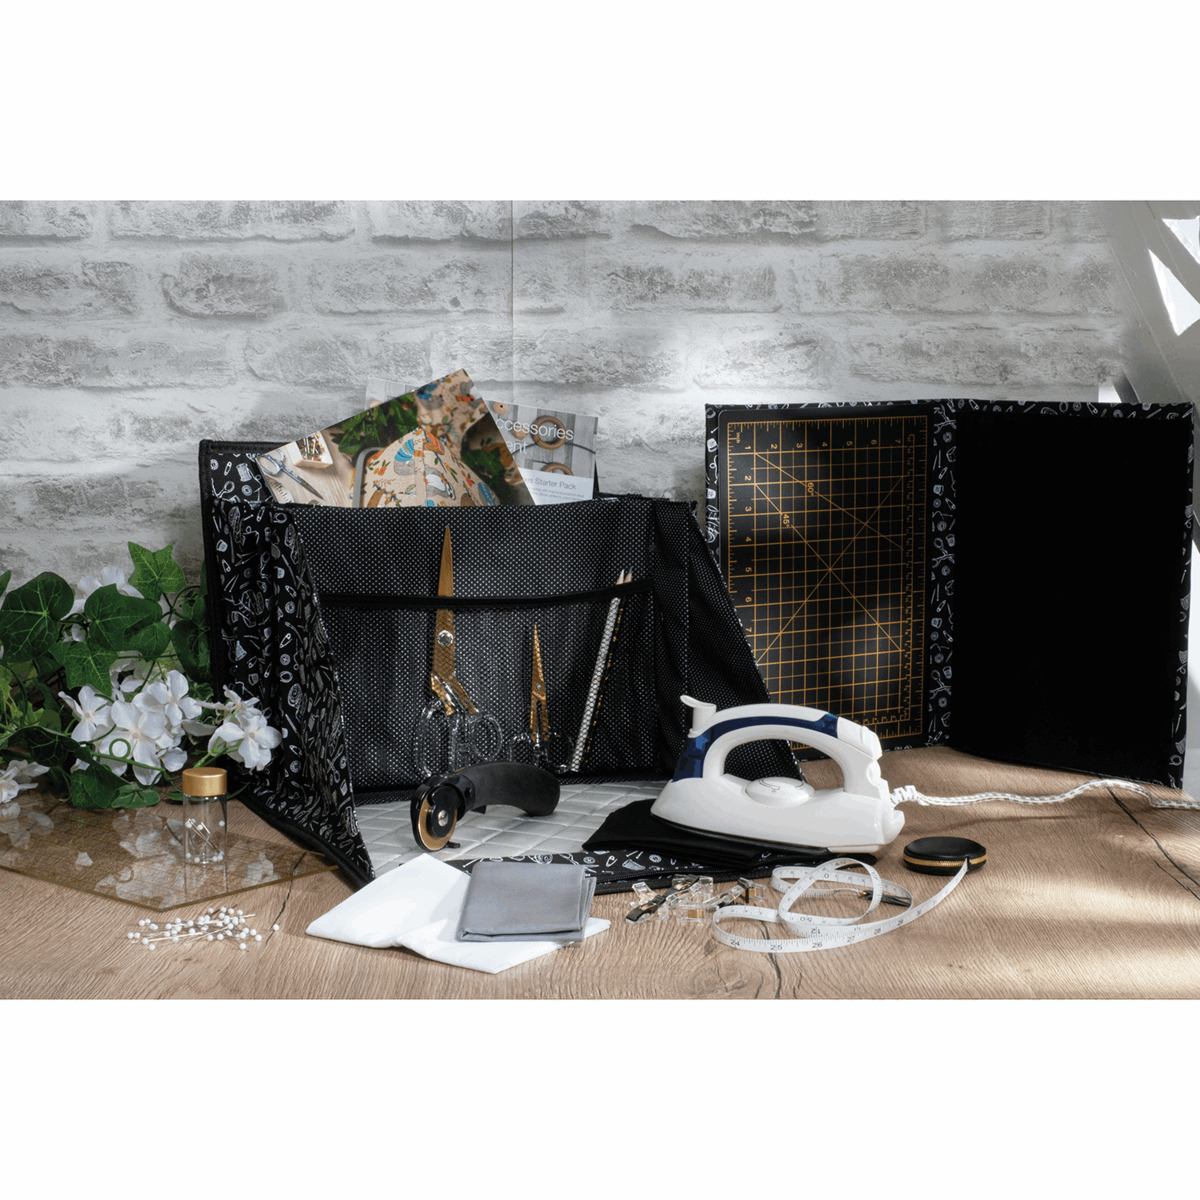 Deluxe Multi-Use Craft Bag - Gold Notions Print *Hemline Gold Edition*